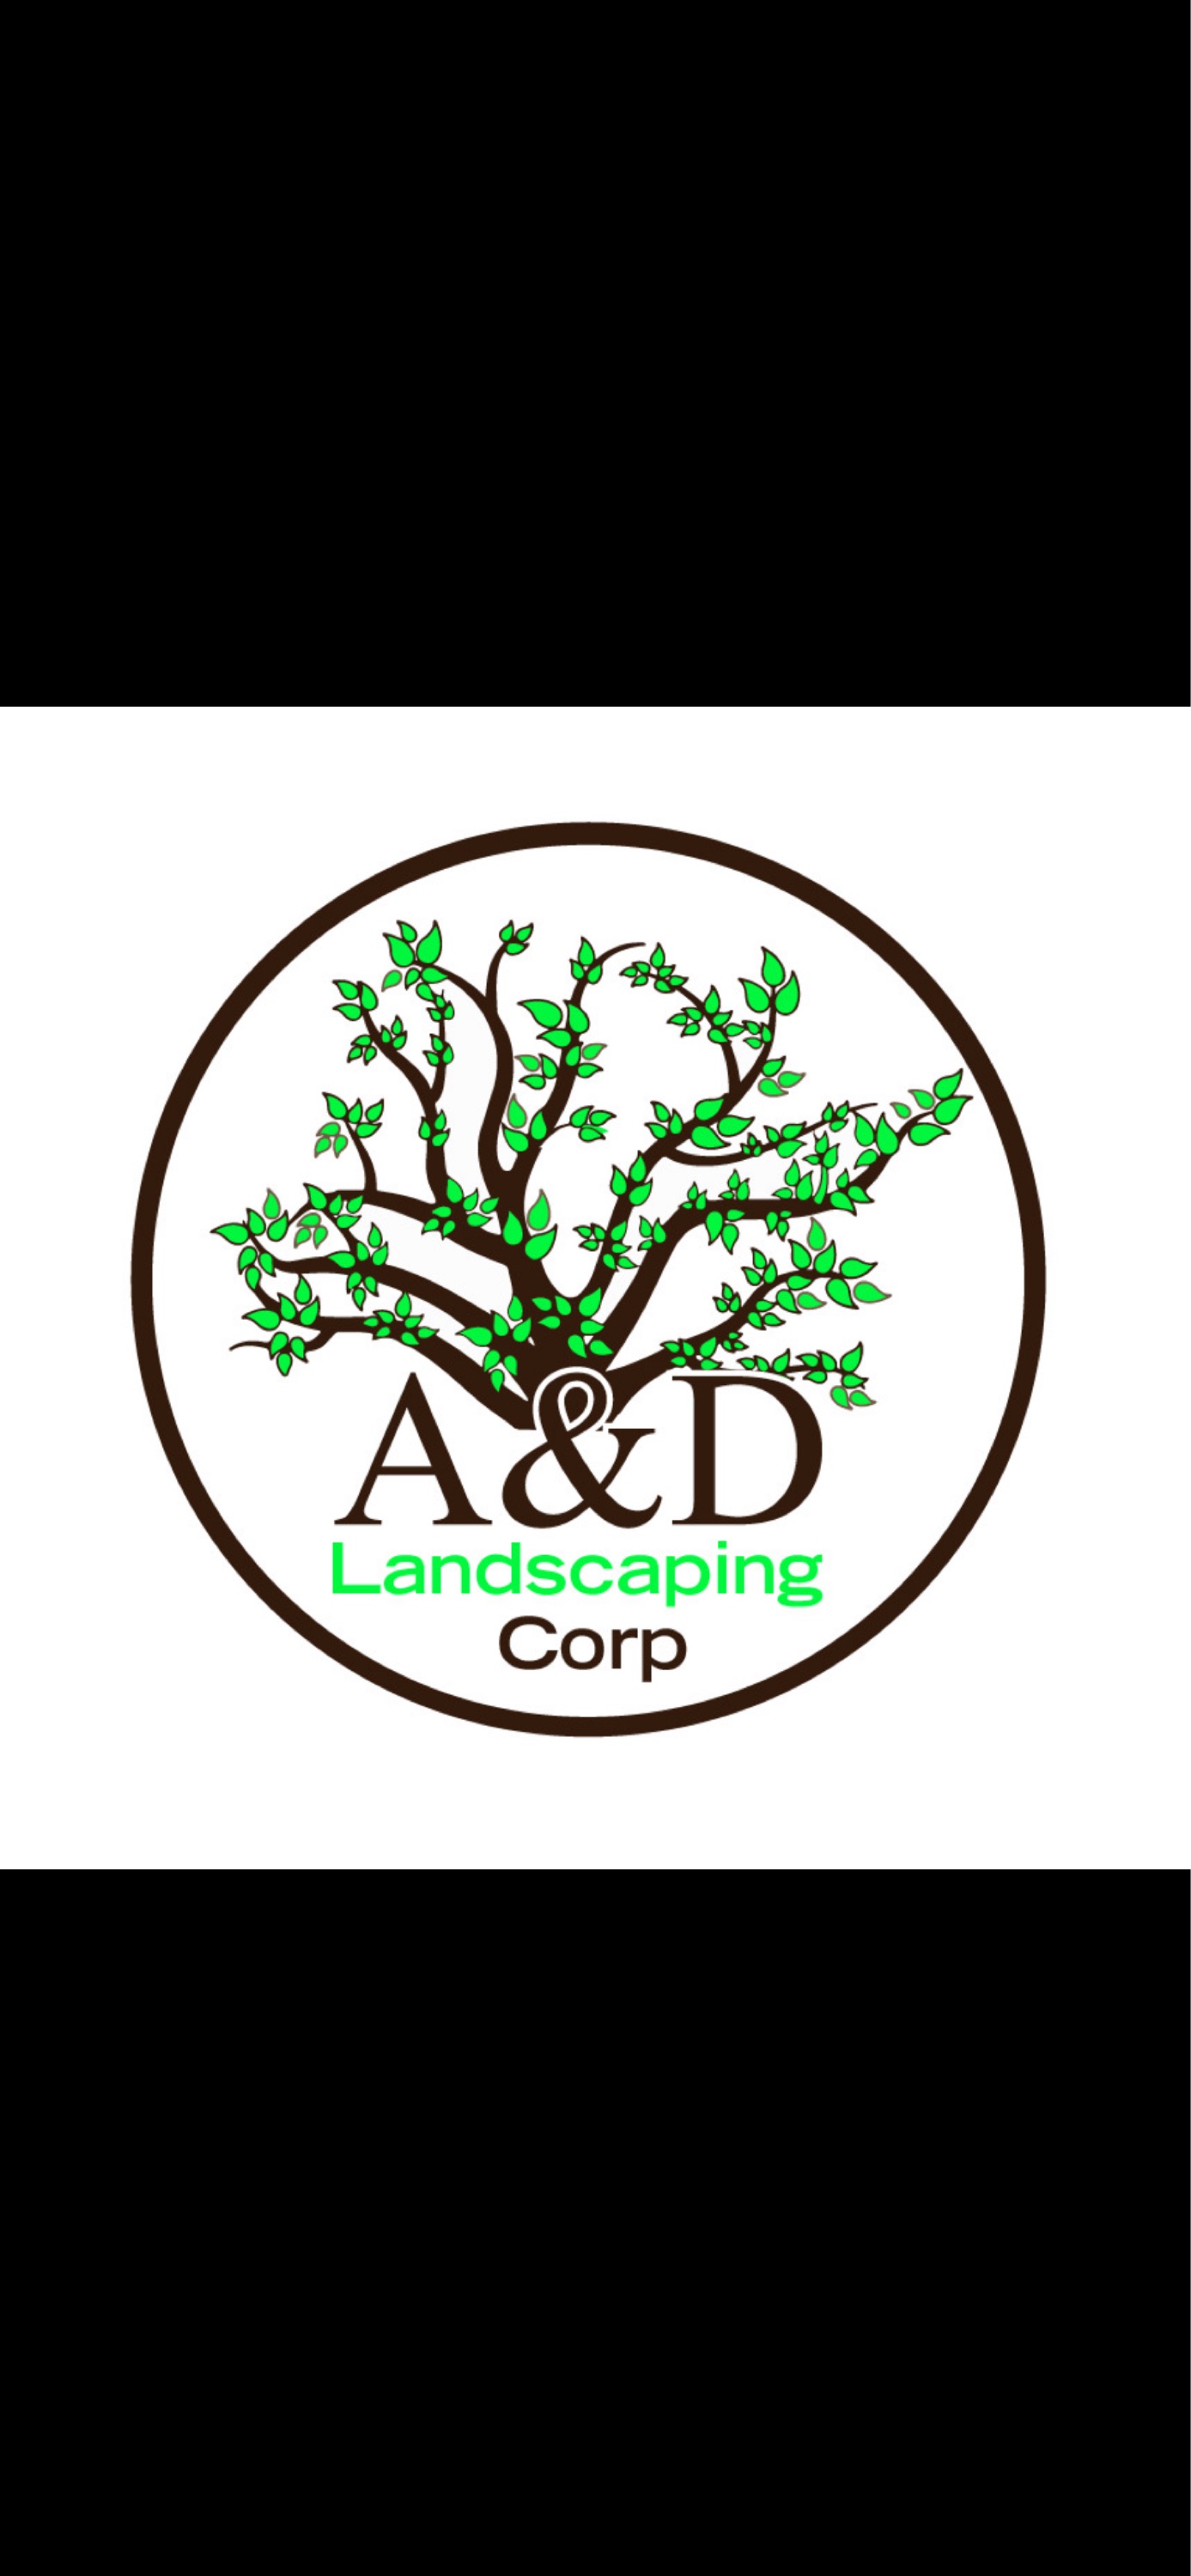 A & D Landscaping Corp Logo